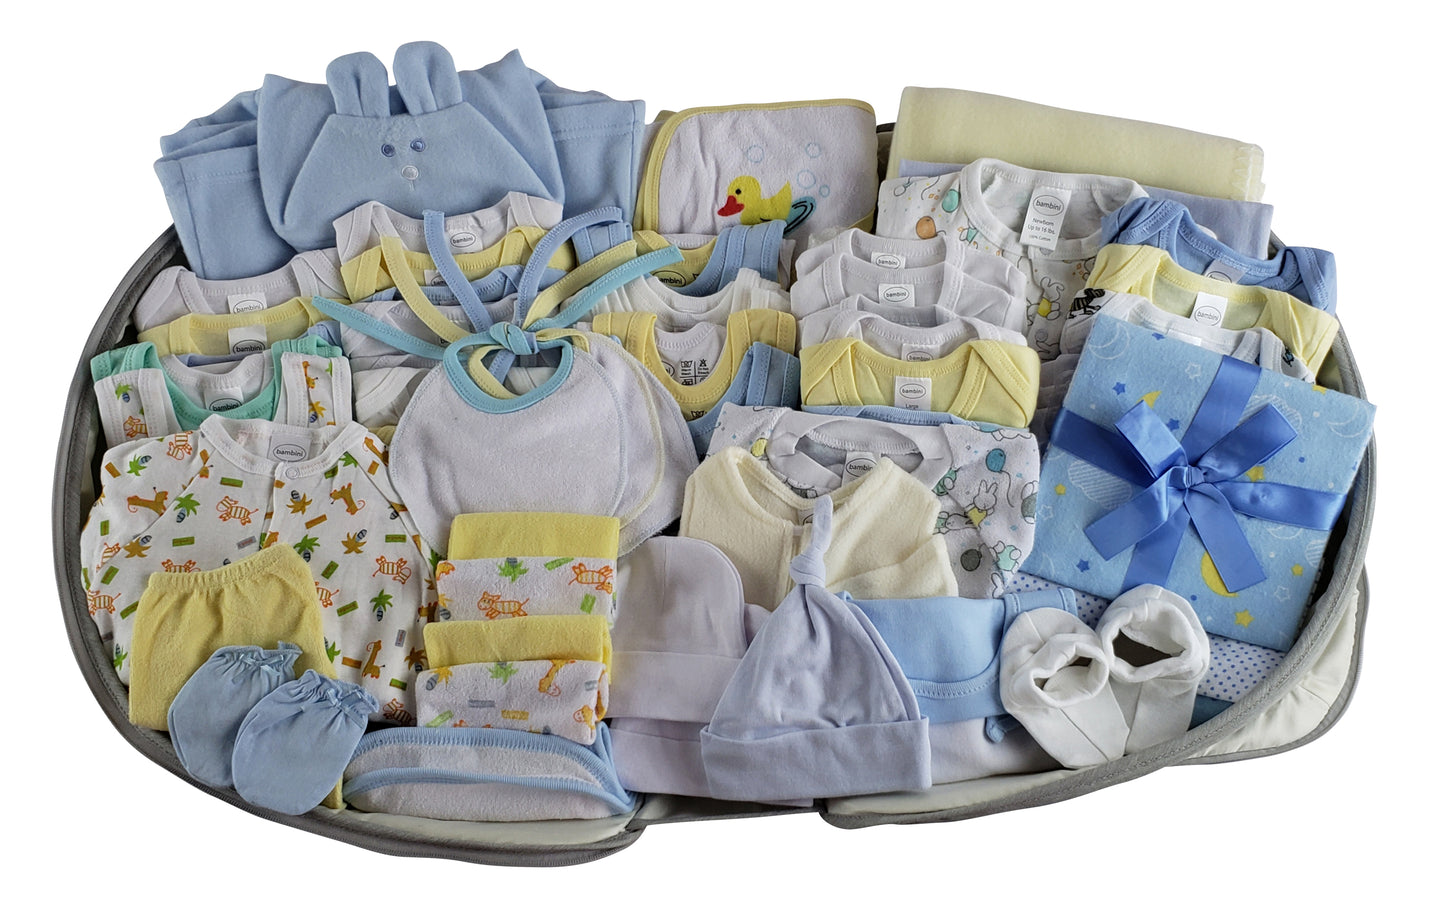 Boys 62 pc Baby Clothing Starter Set with Diaper Bag 808-62-Set